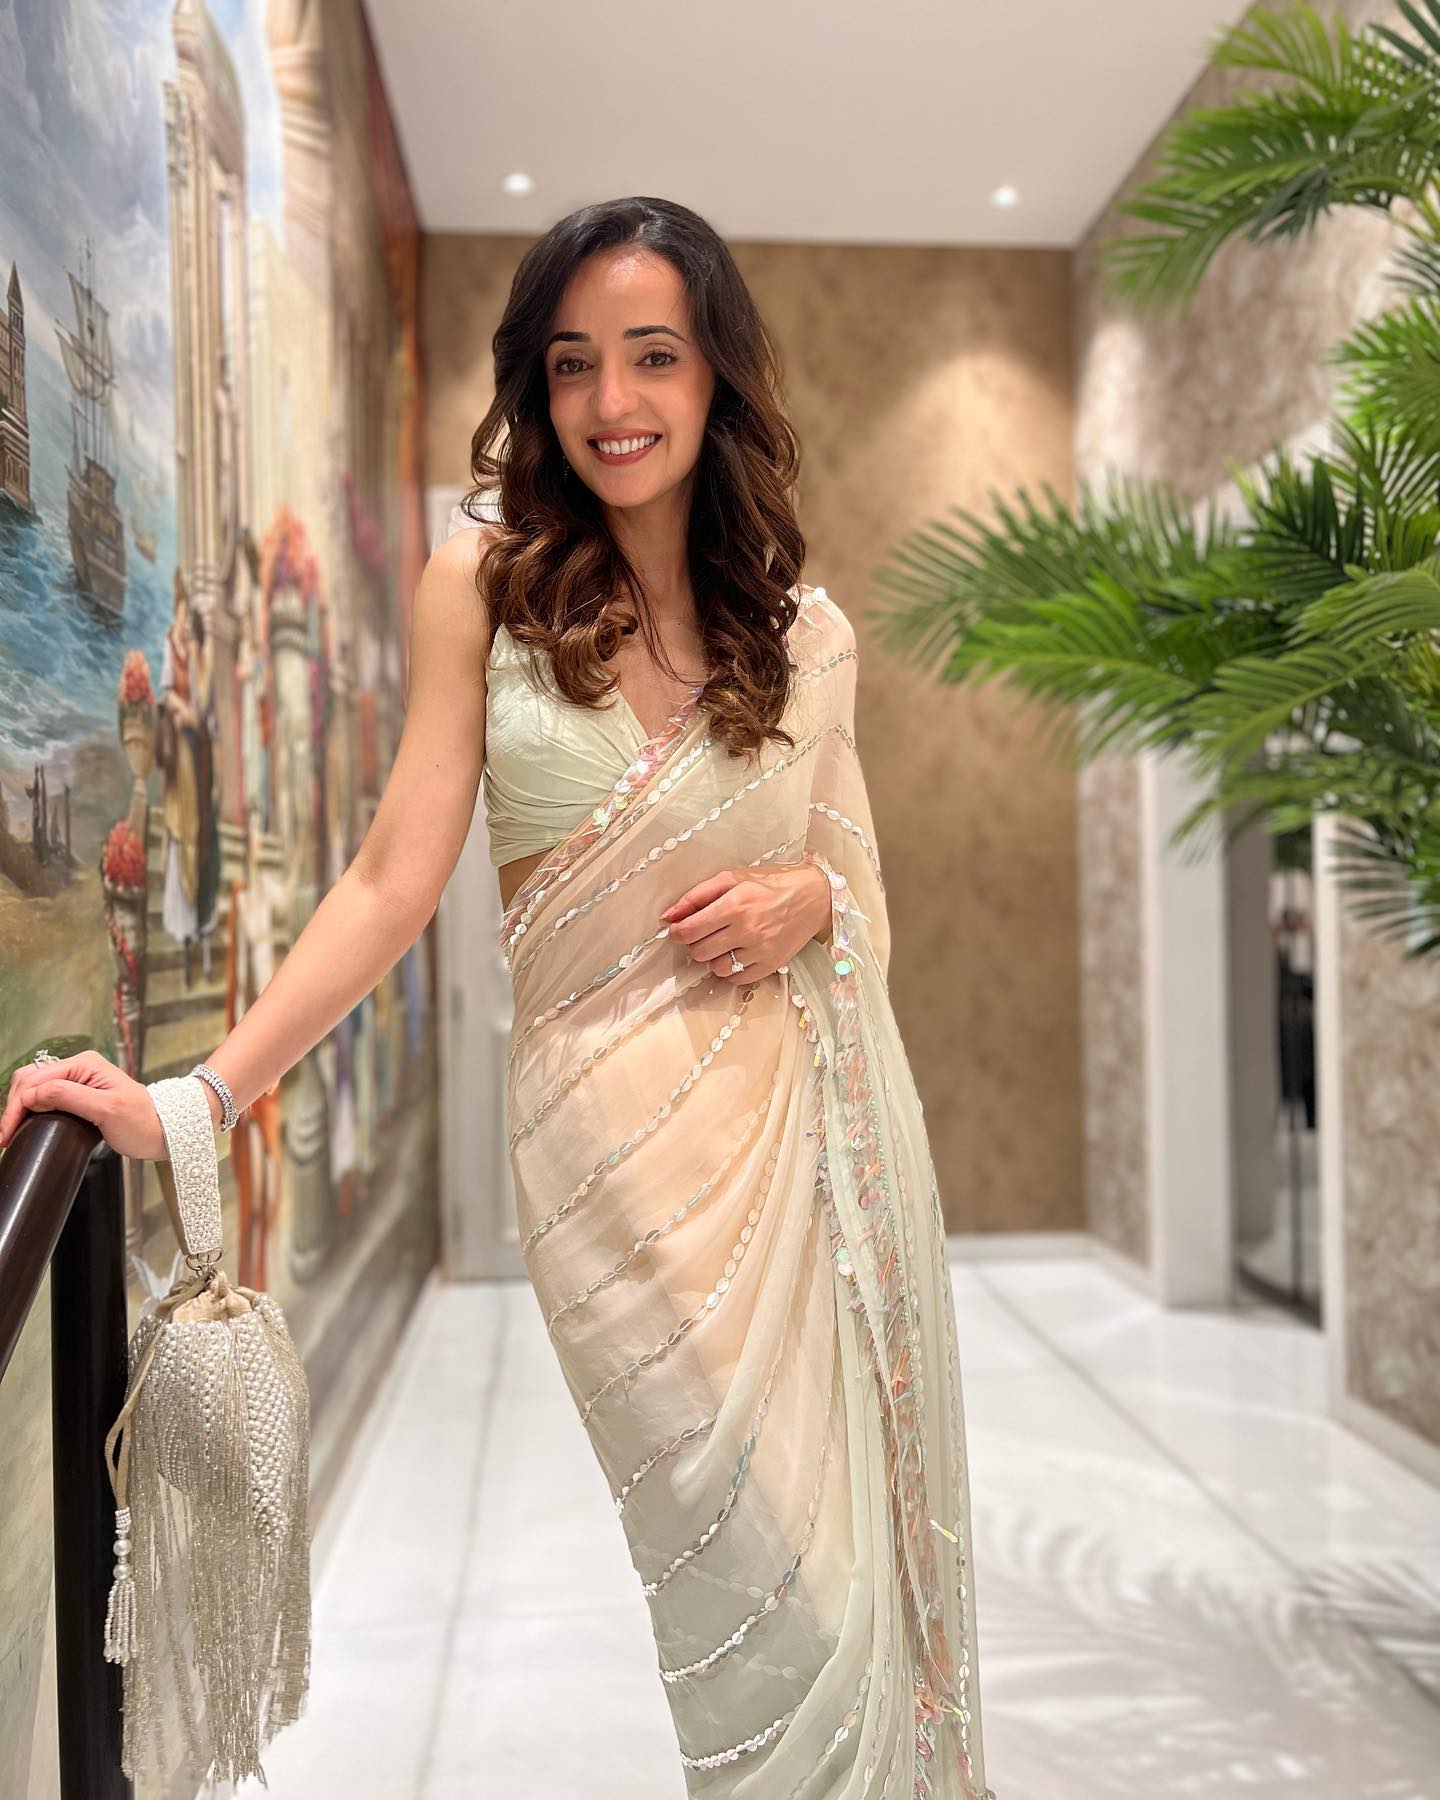 Sanaya Irani Shared The Best Moments From Her Co-Star Abhaas Mehta’s Wedding; She Wrote, “It Took You Guys More Than A Decade To Do This, But Totally Worth It”